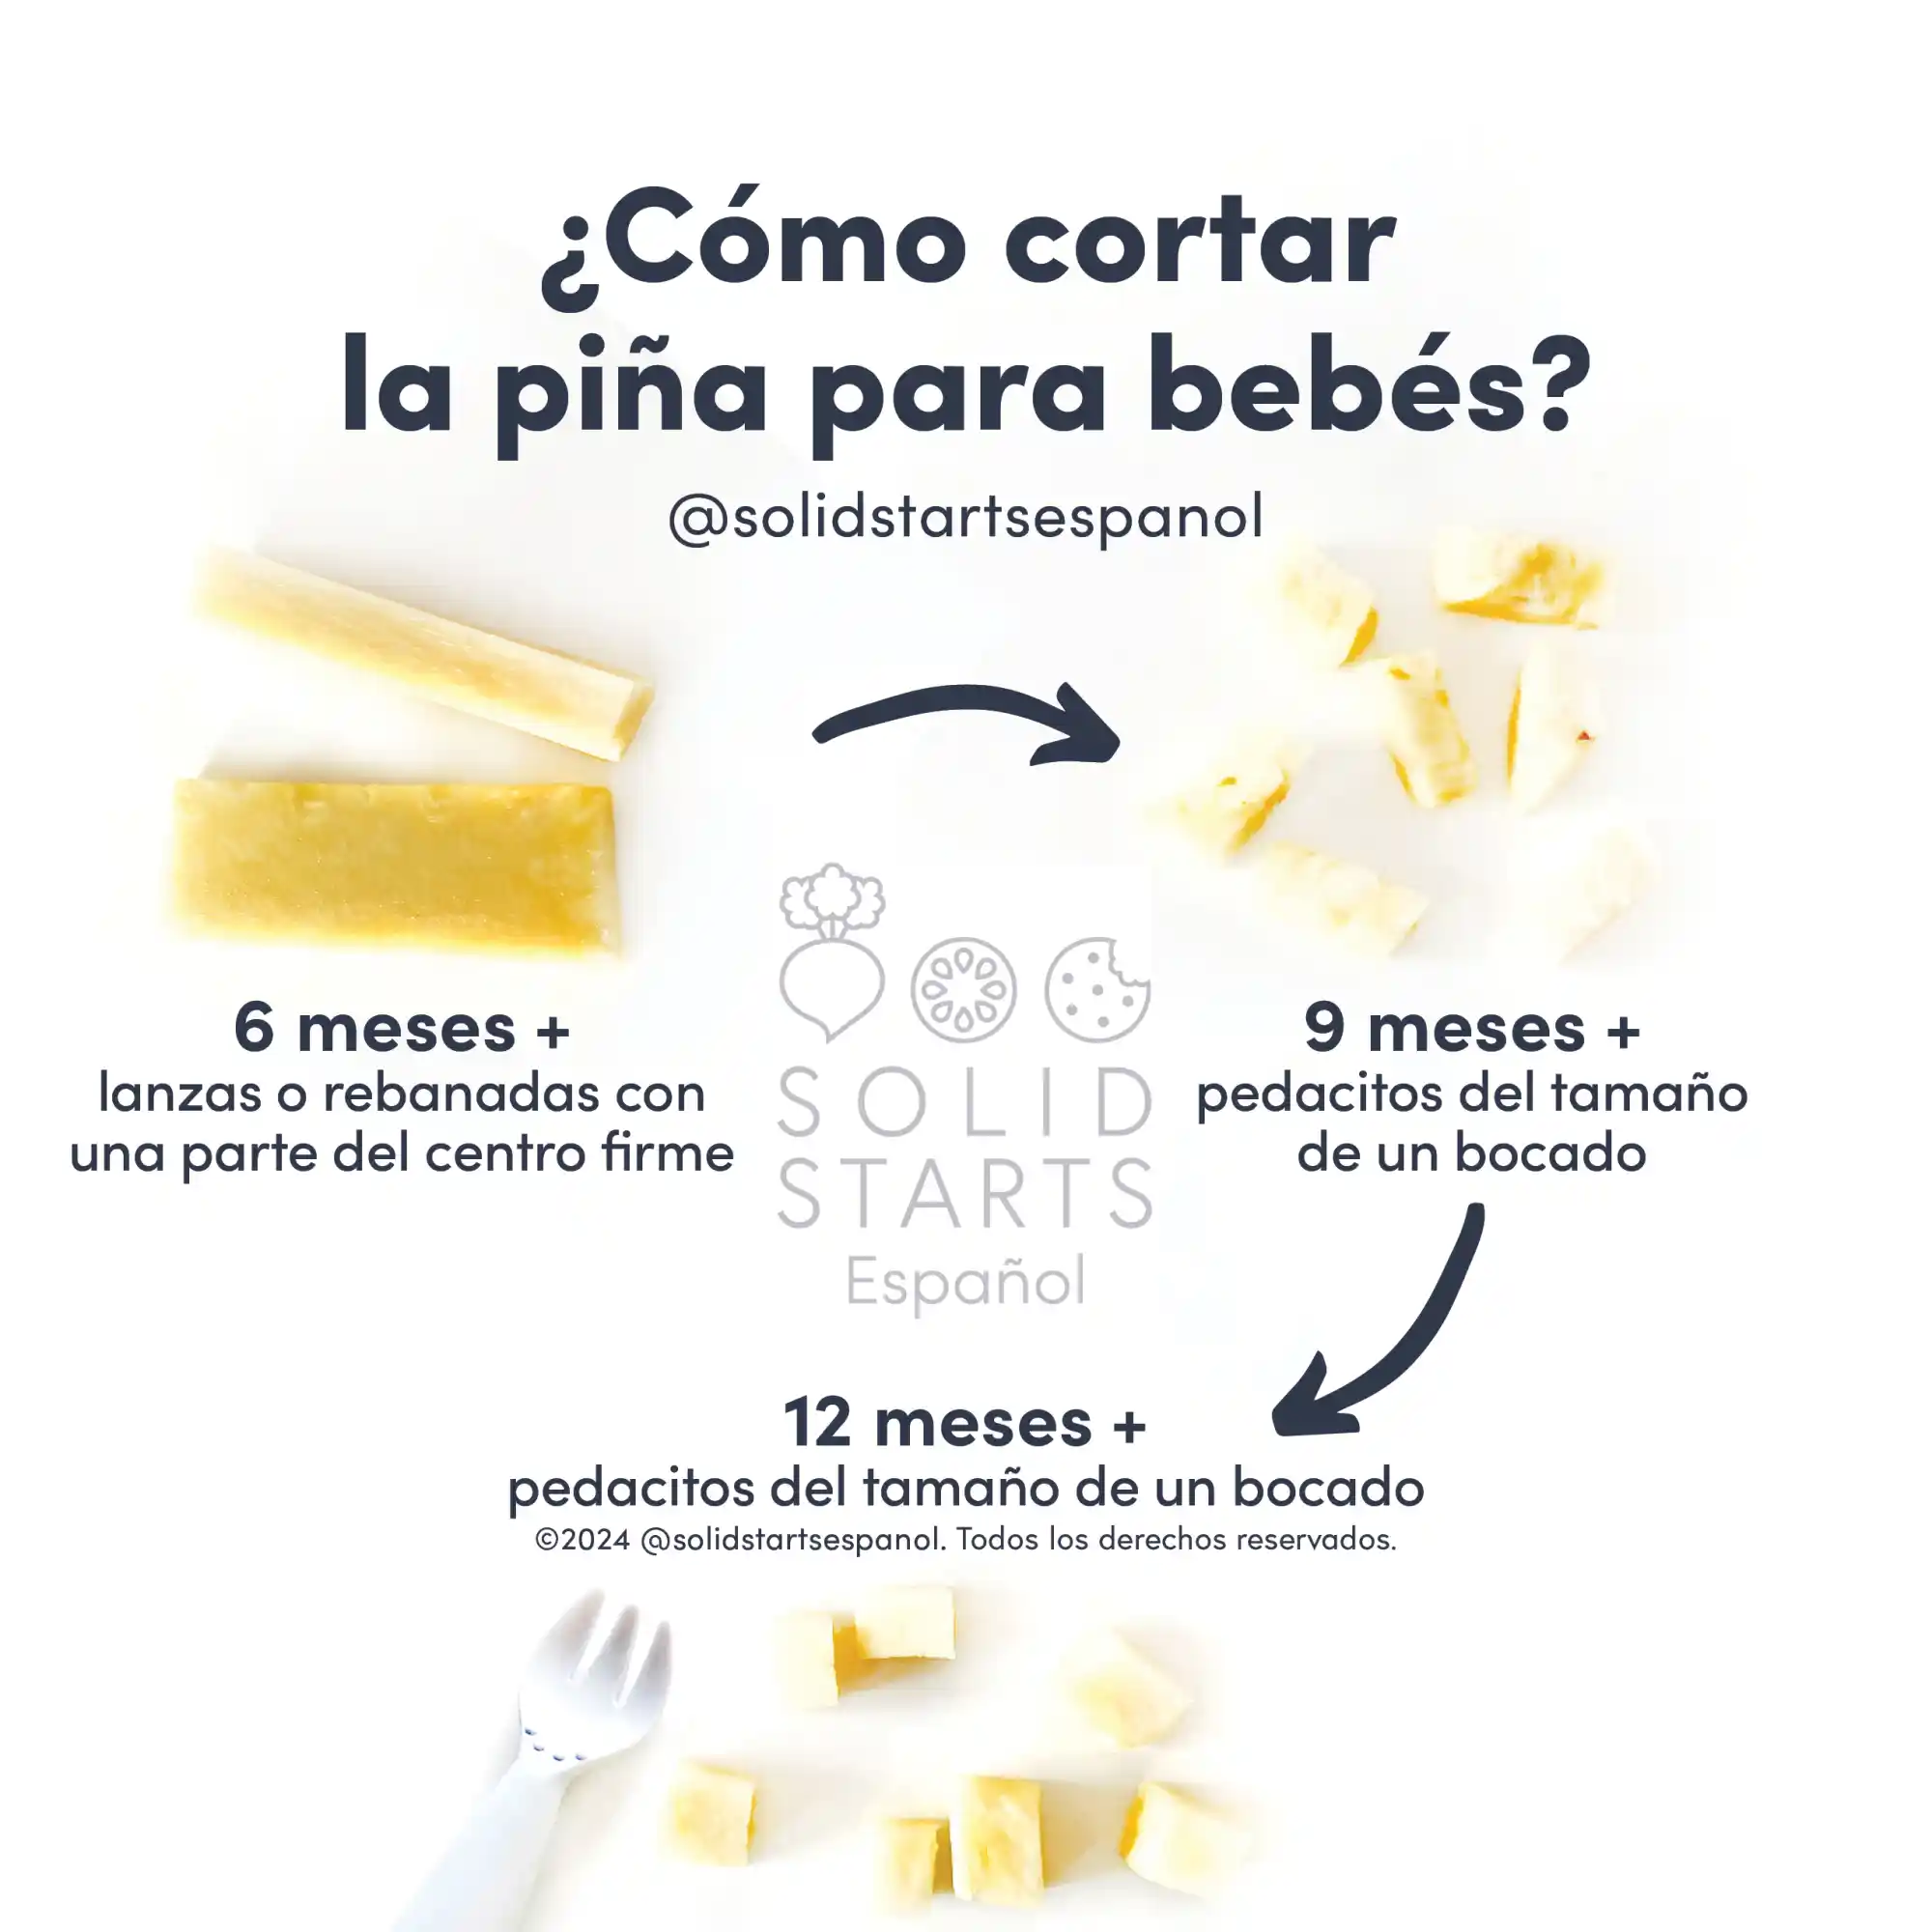 an infographic with the header "how to cut pineapple for babies": long thin sticks for babies 6 months+, bite size pieces for 9 months+, and bite sized pieces with a fork for toddlers 12 months+